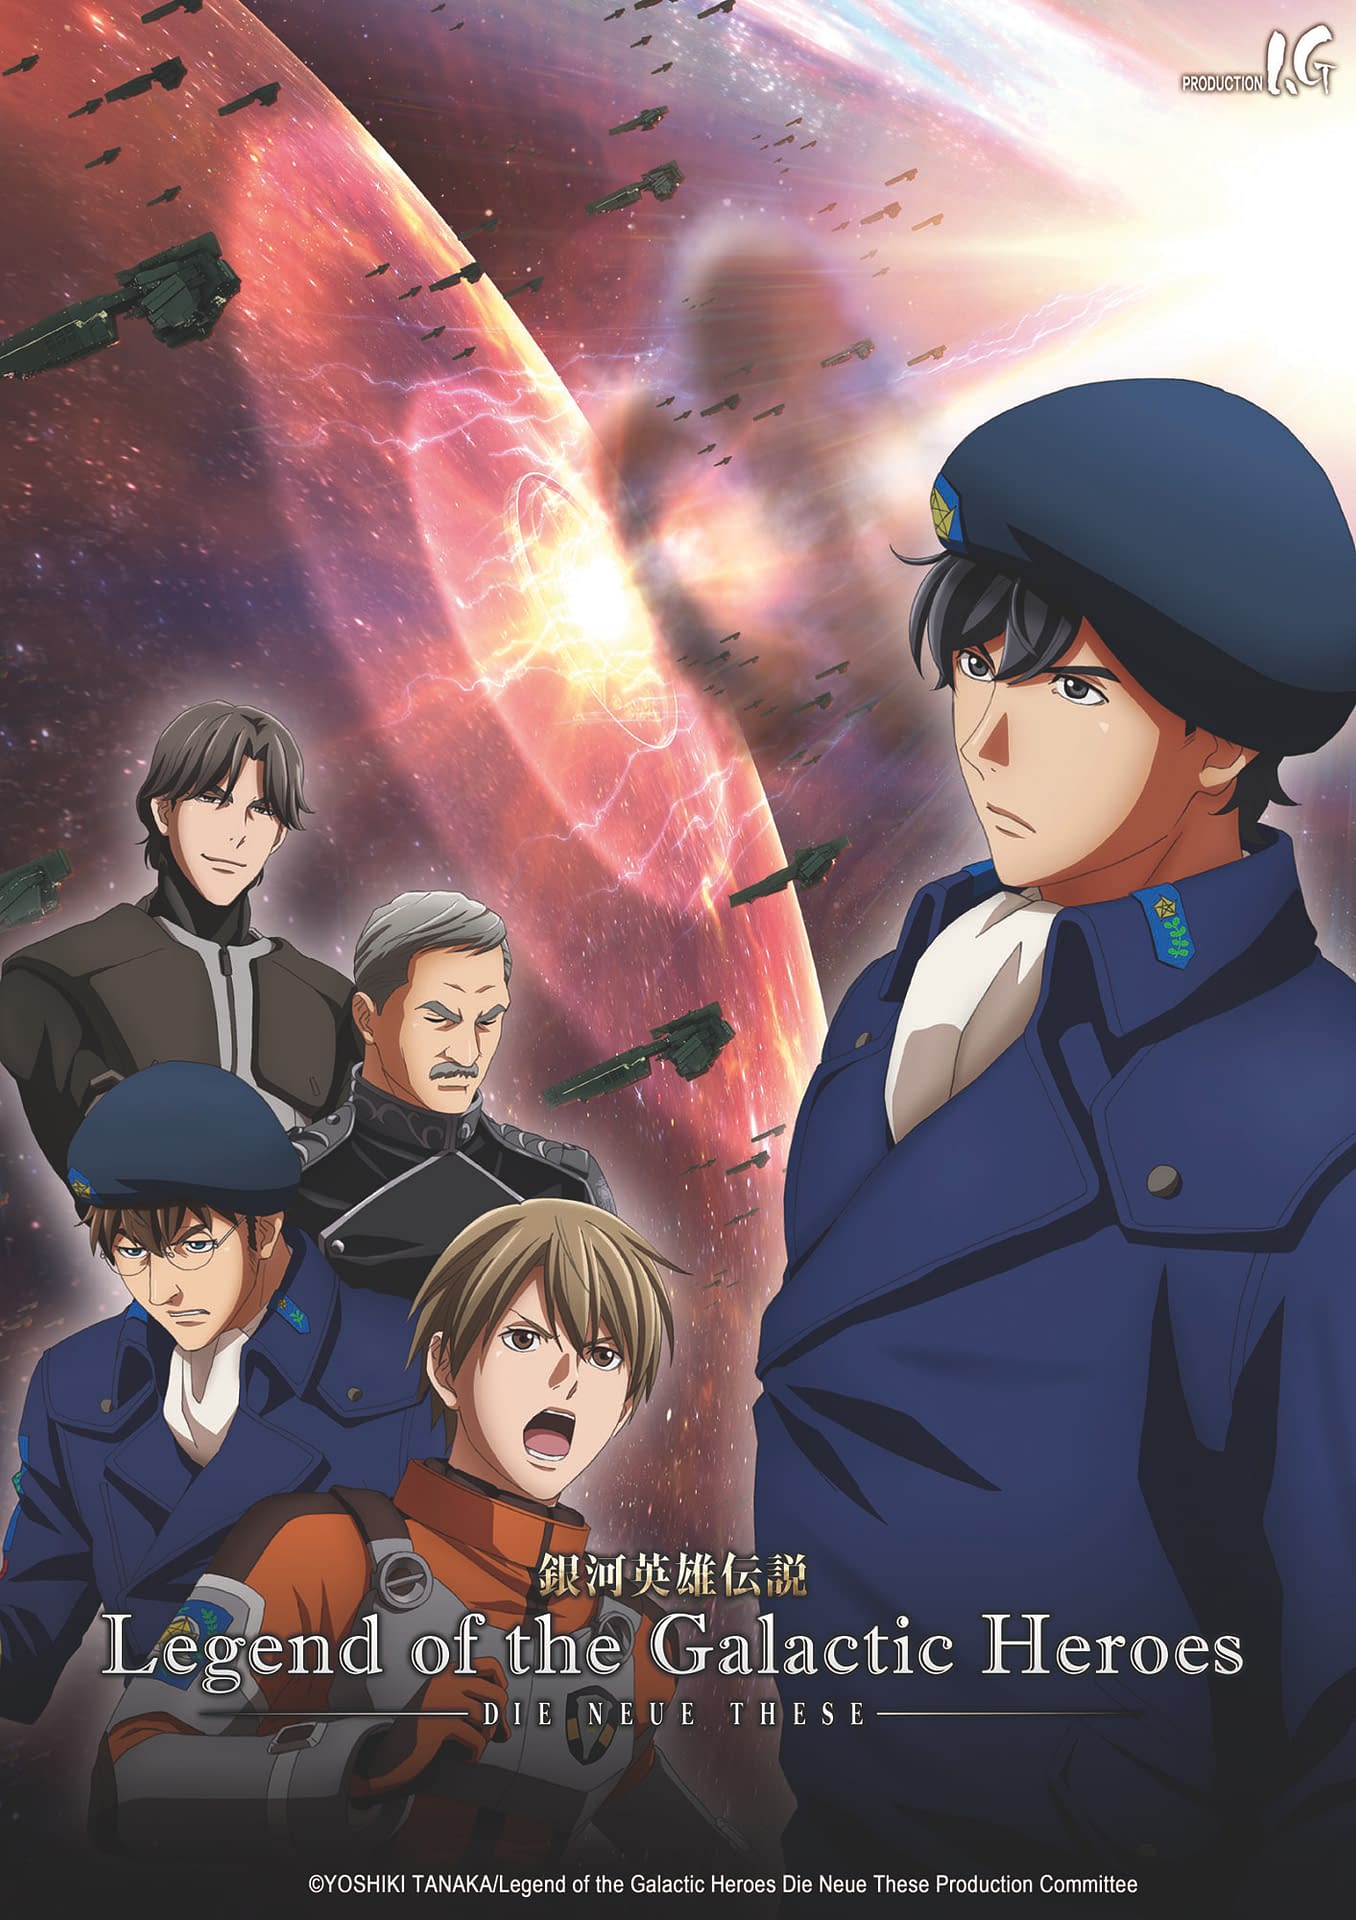 Spy x Family Episode 11 Release Date and Time for Crunchyroll, Hulu